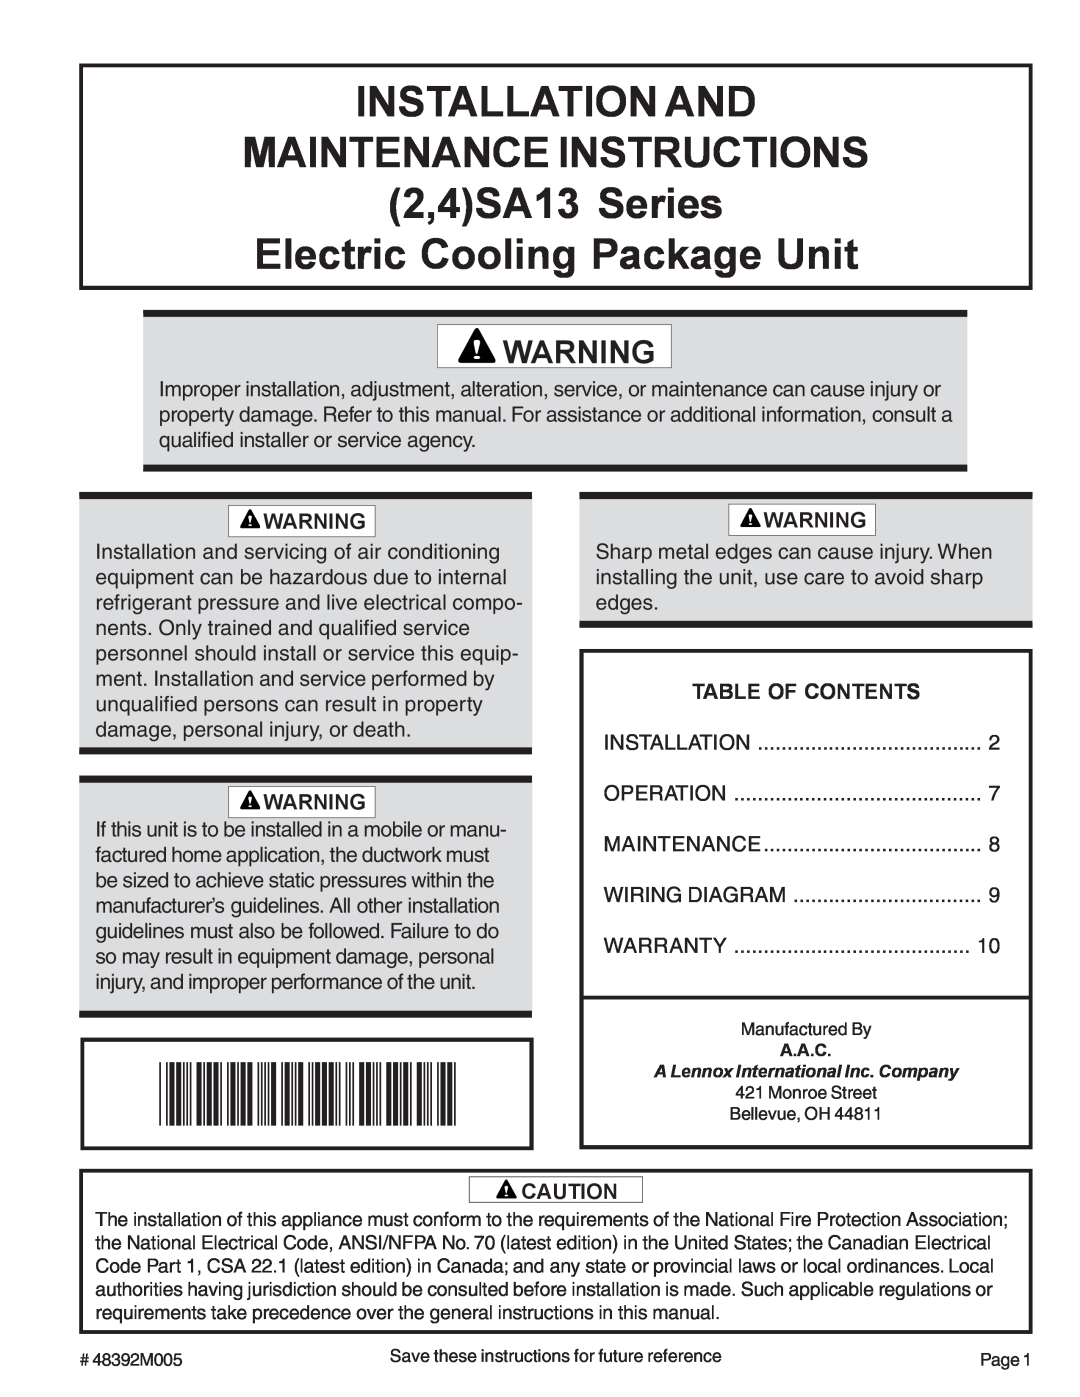 Lennox International Inc (2/4)SA13 warranty Table Of Contents, 48392M005, Installation And Maintenance Instructions 